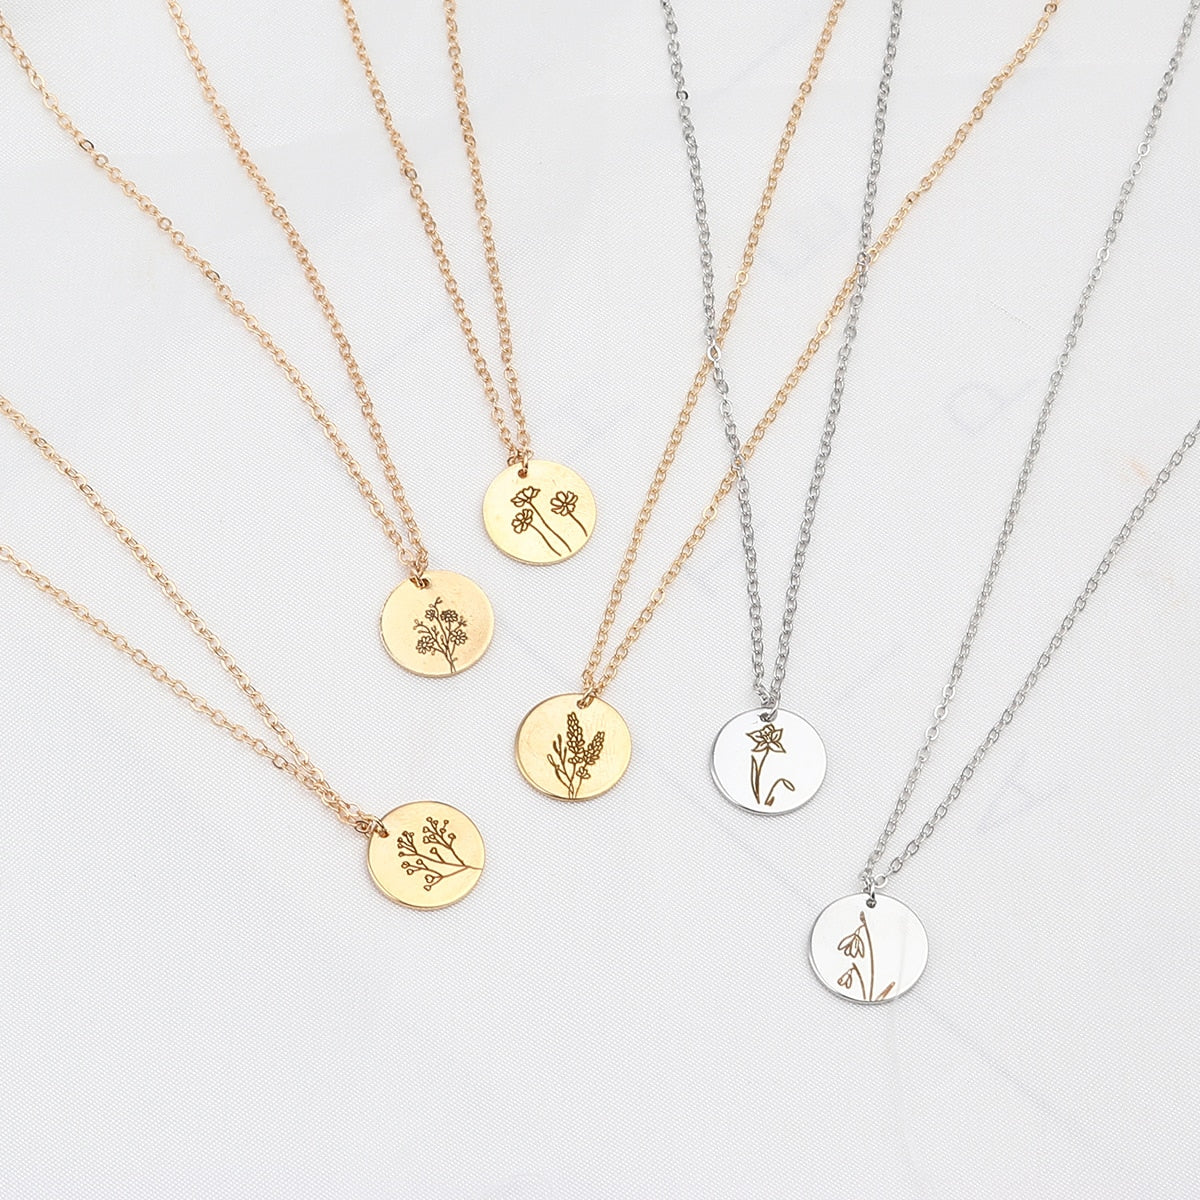 Birth Month Flower Necklace Gold Color January Snowdrop Flower For Women Gift The New Year 44cm(17 3/8&quot;) long, 1 Piece